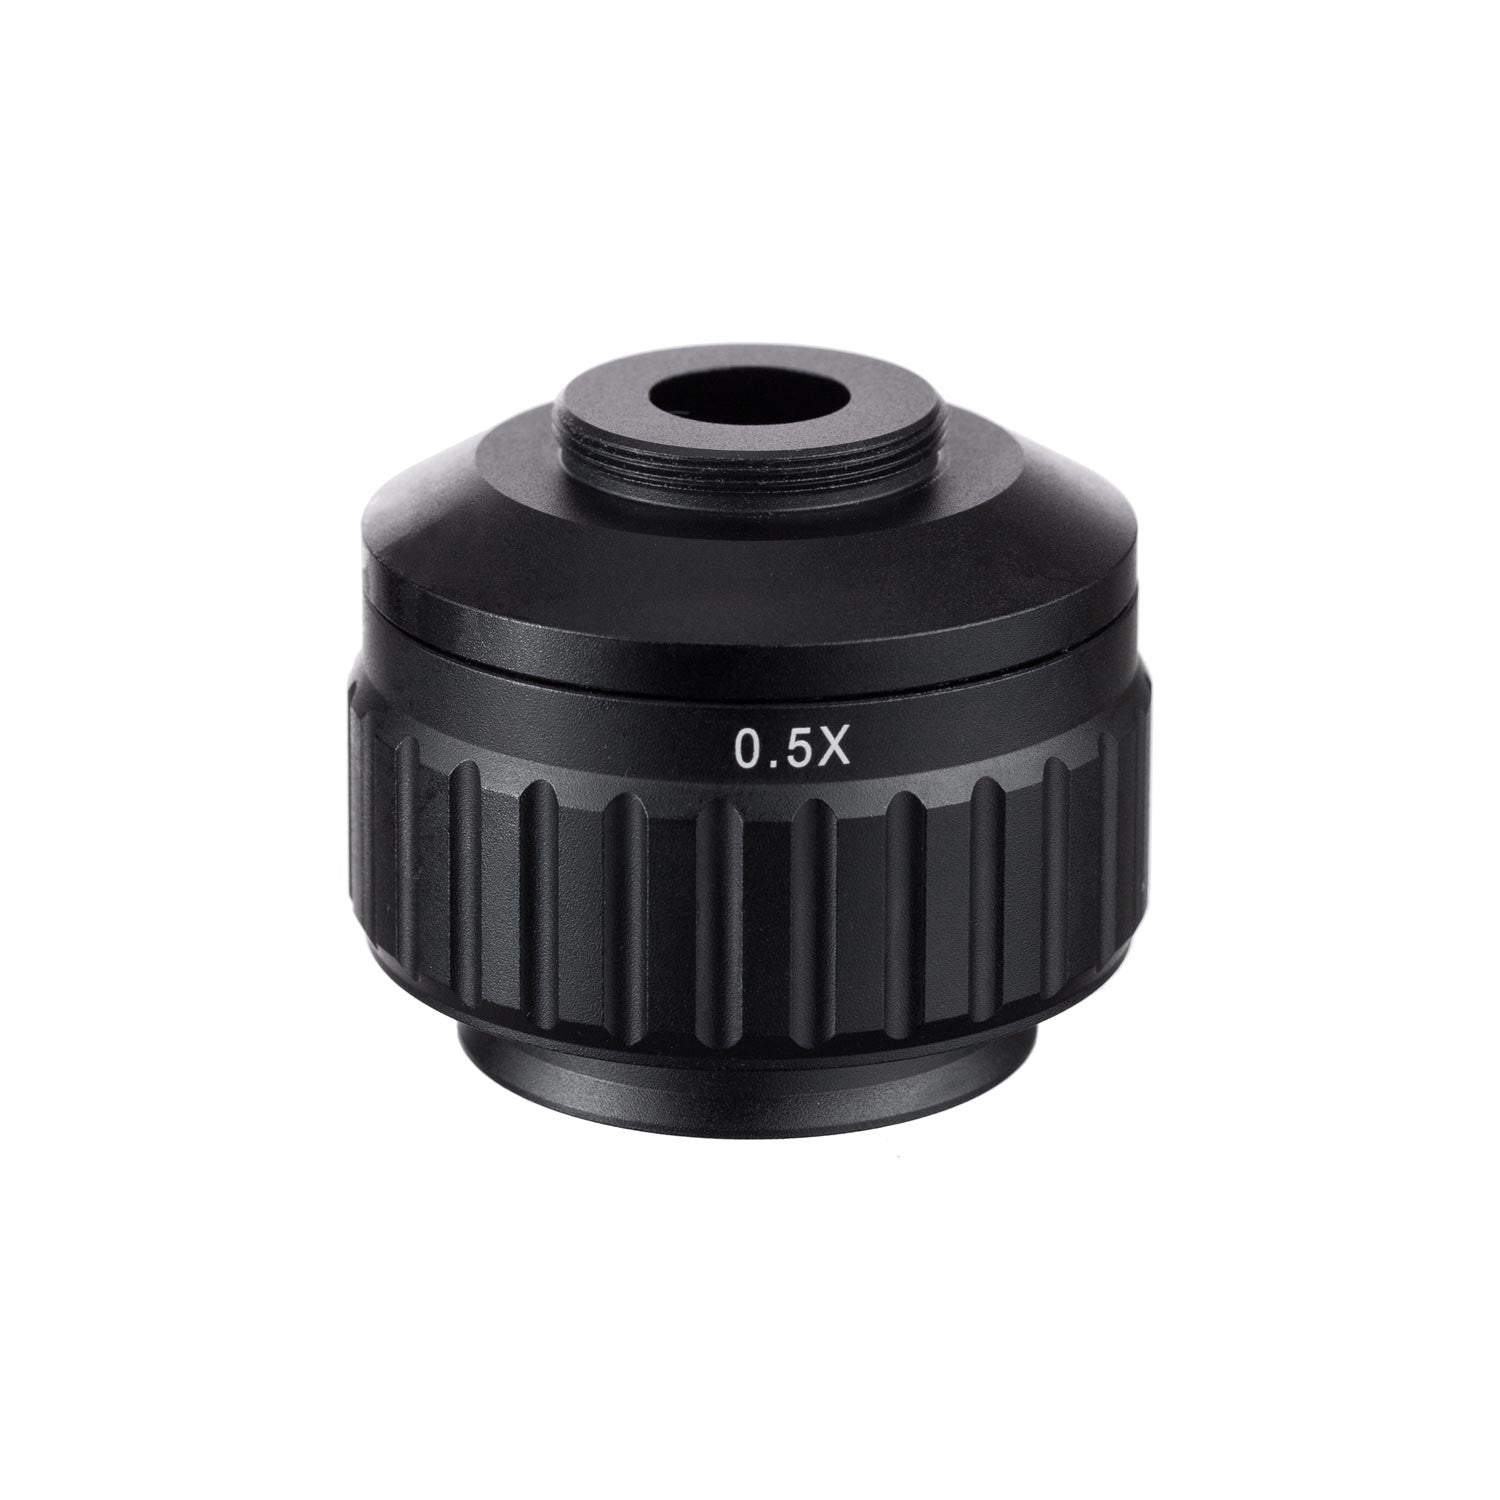 C-Mount Adapers For Accu-Scope 3000-LED